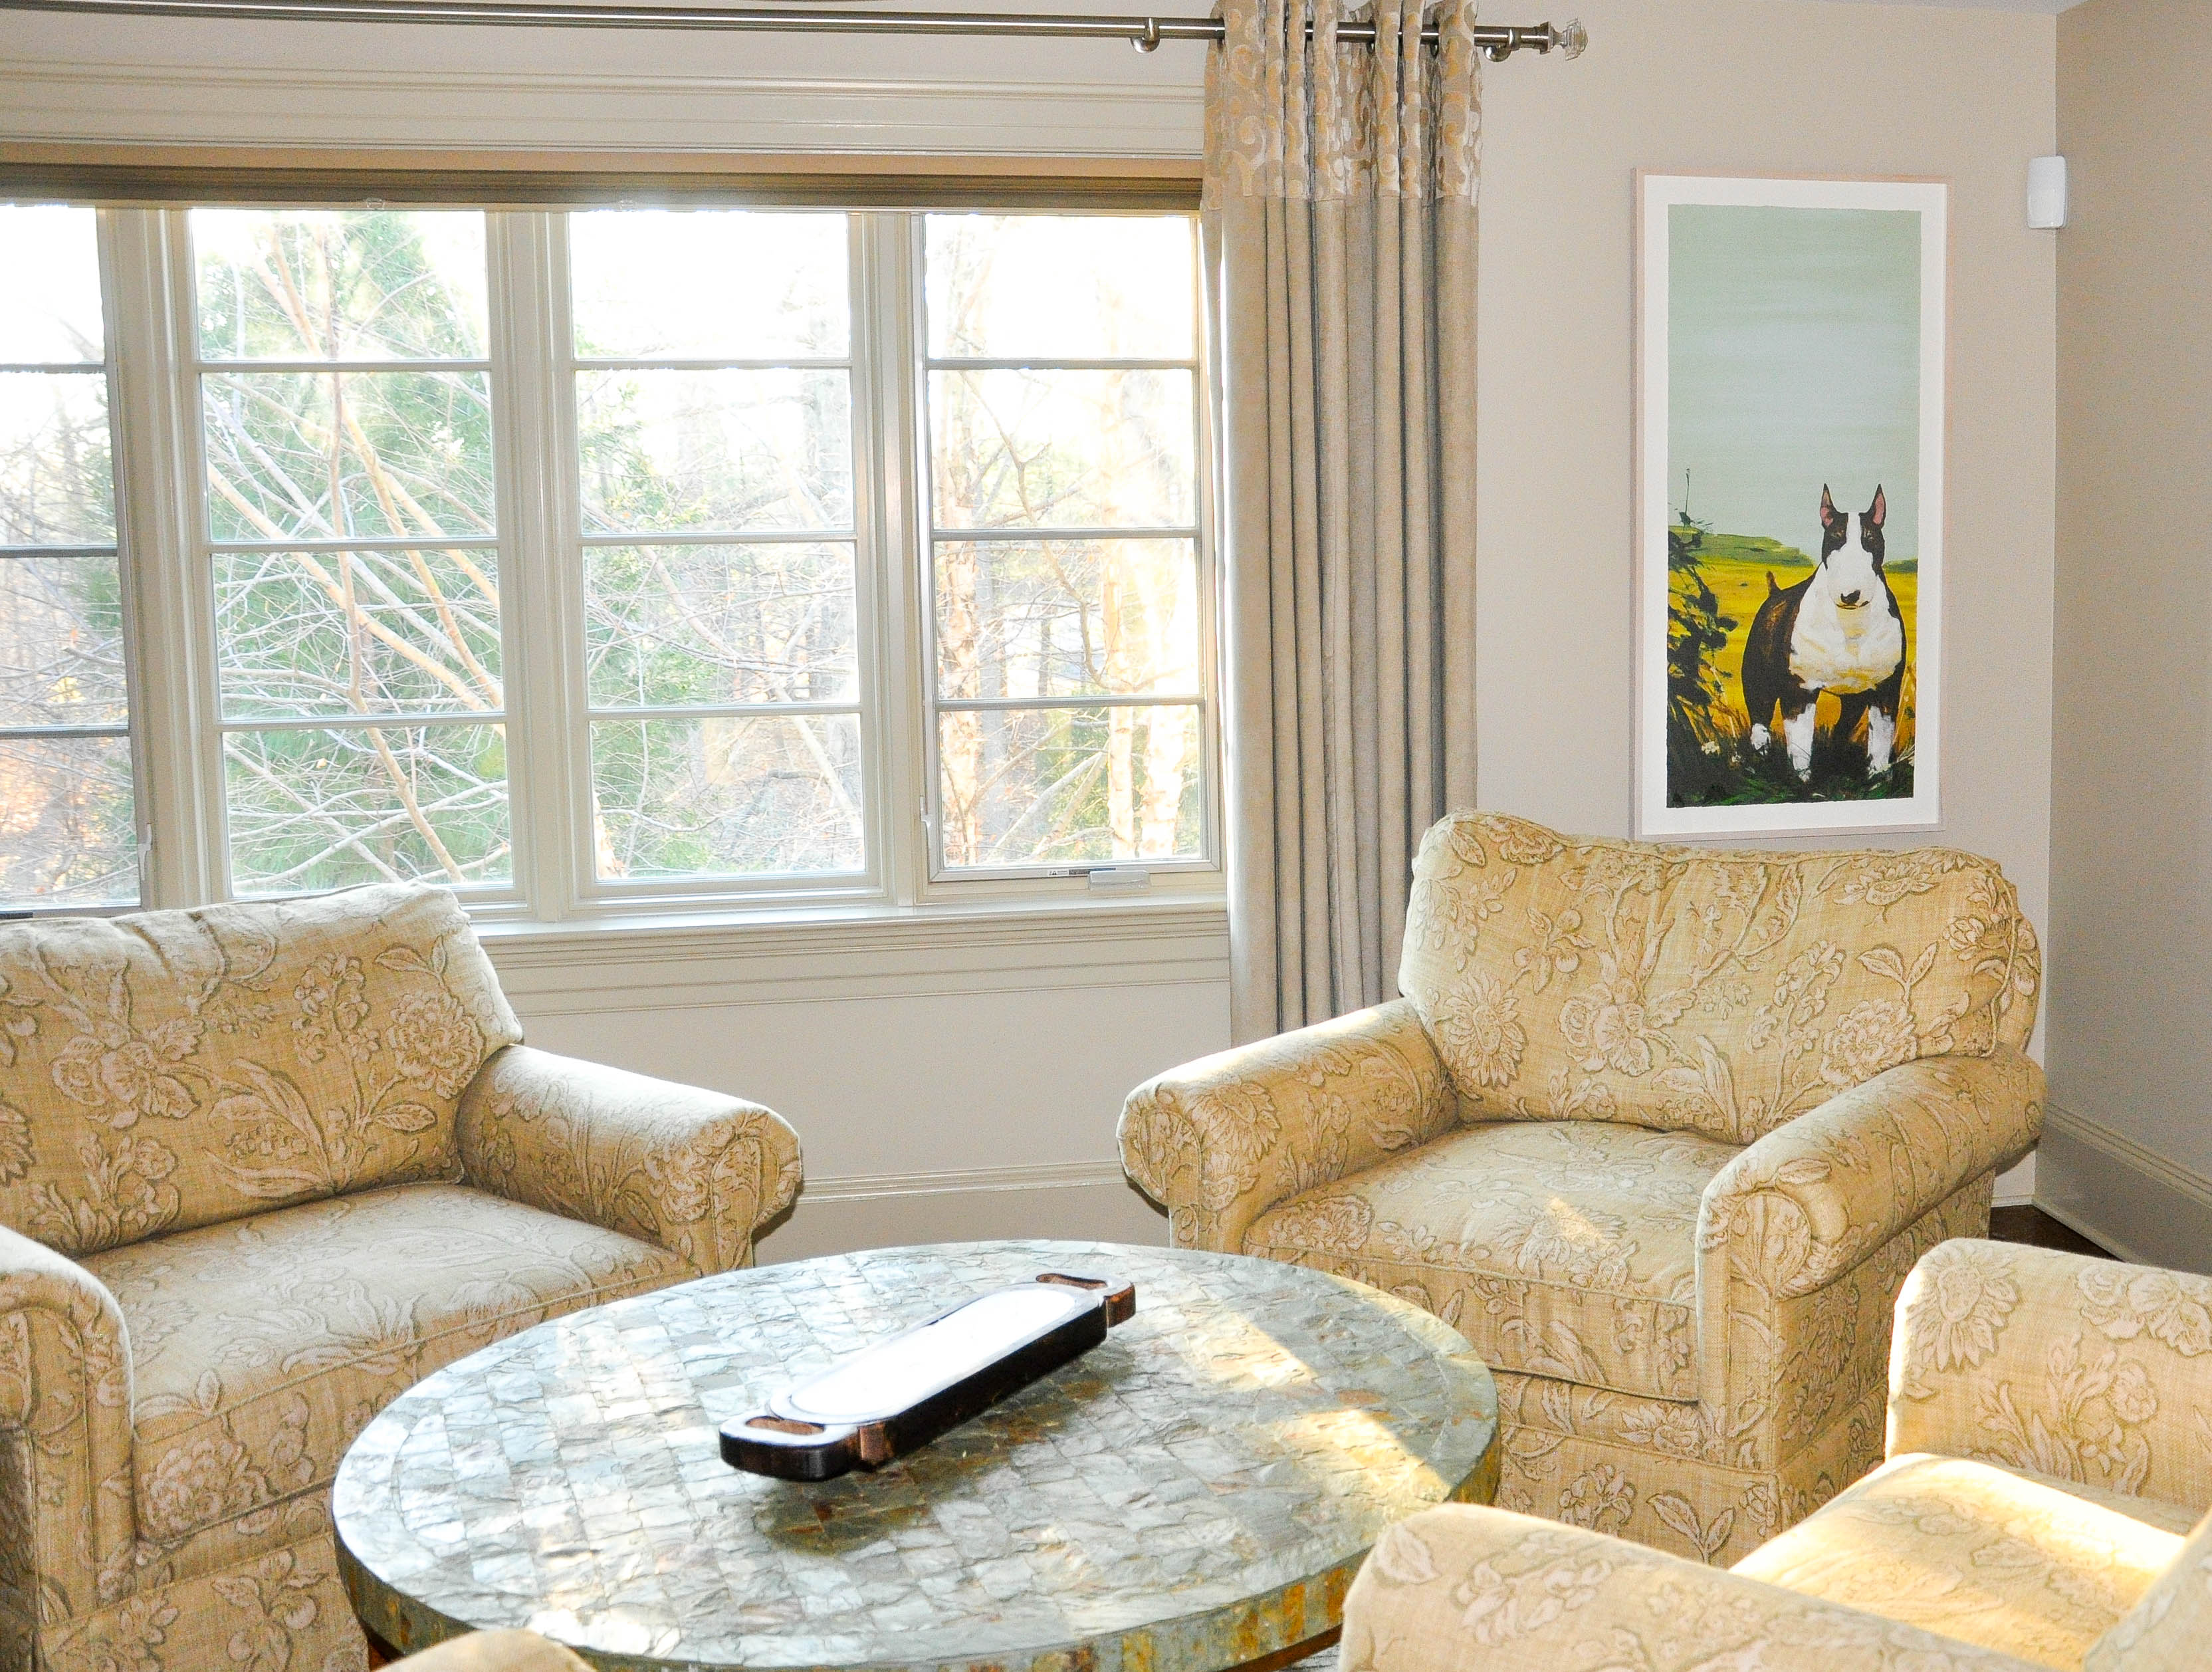 A gorgeous light-filled lounge area showcases a row of large windows and a framed art print of a black and white terrier dog.